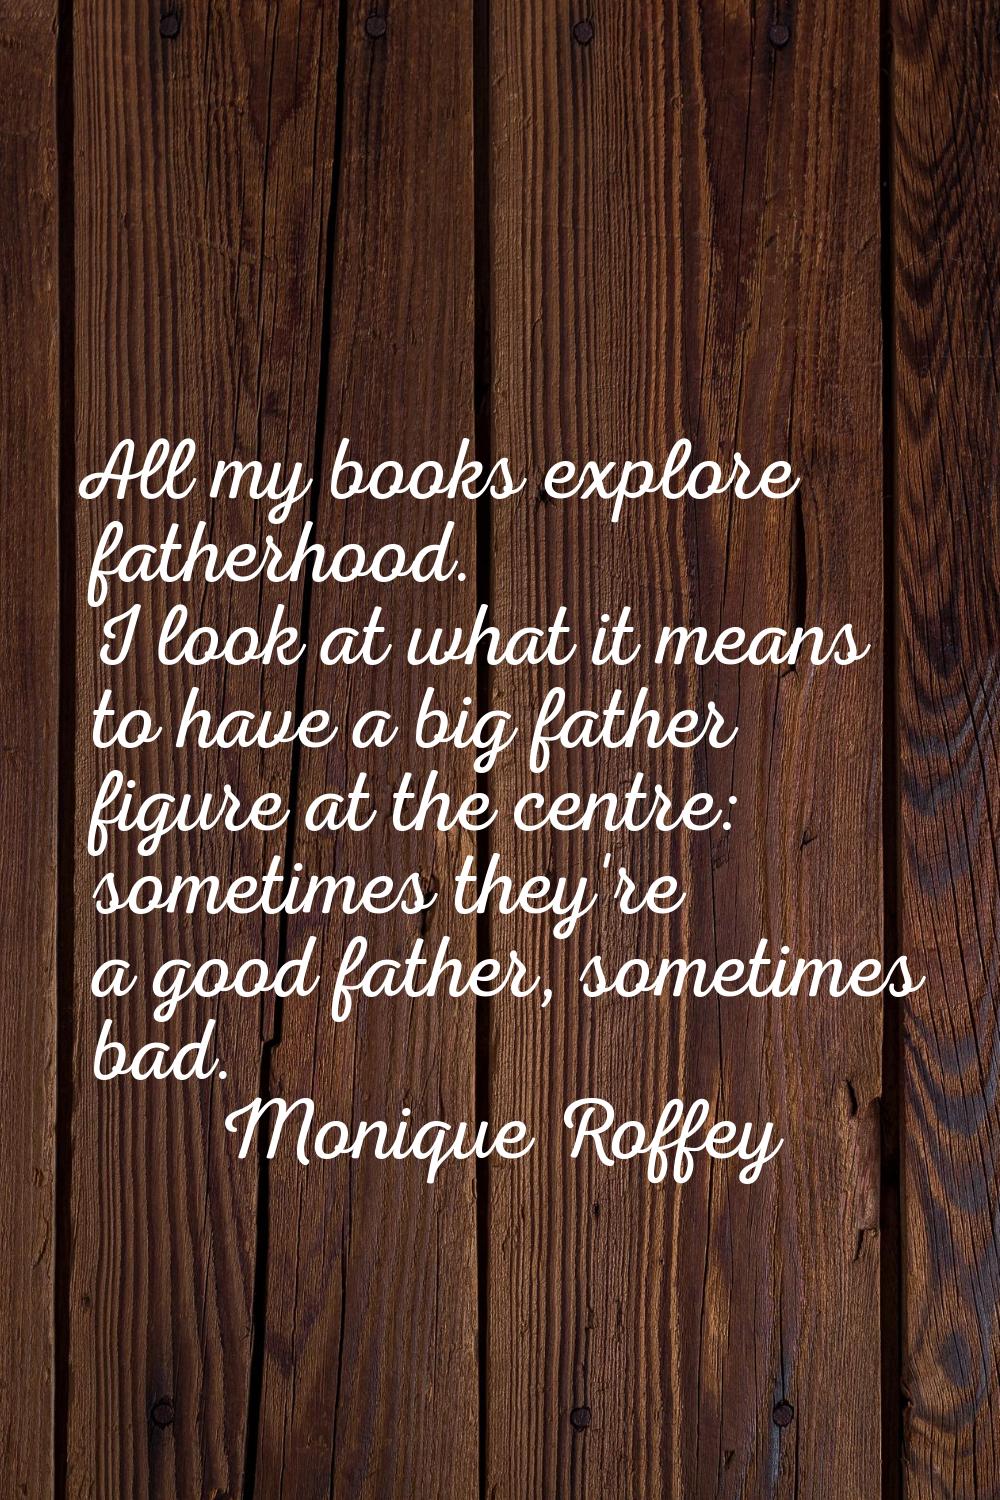 All my books explore fatherhood. I look at what it means to have a big father figure at the centre: